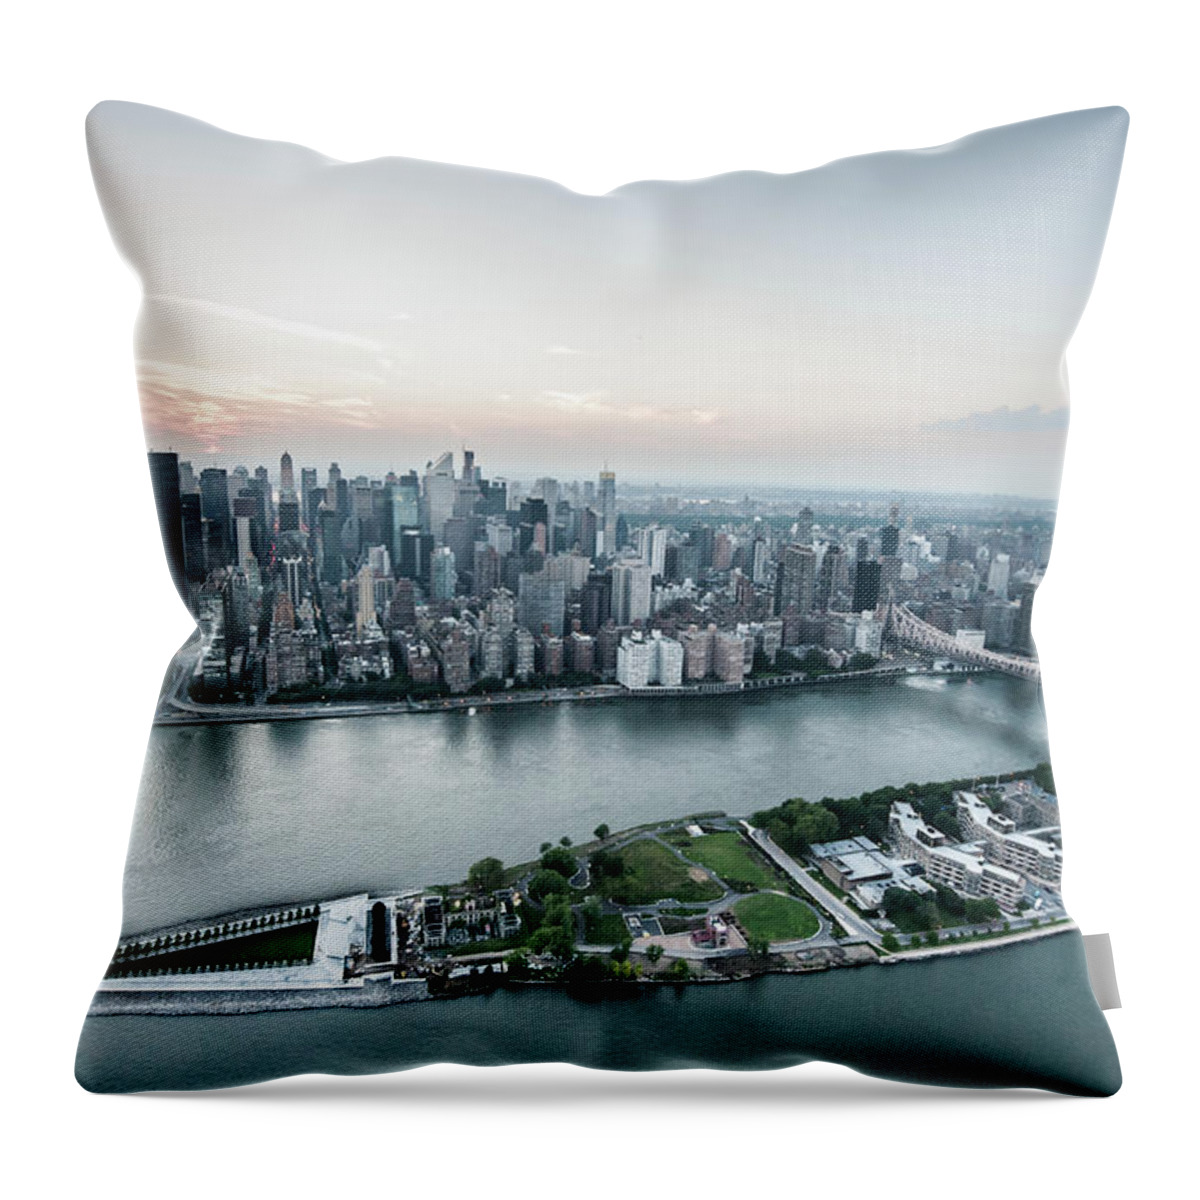 Tranquility Throw Pillow featuring the photograph Aerial View Roosevelt Island - Four by Keith Sherwood